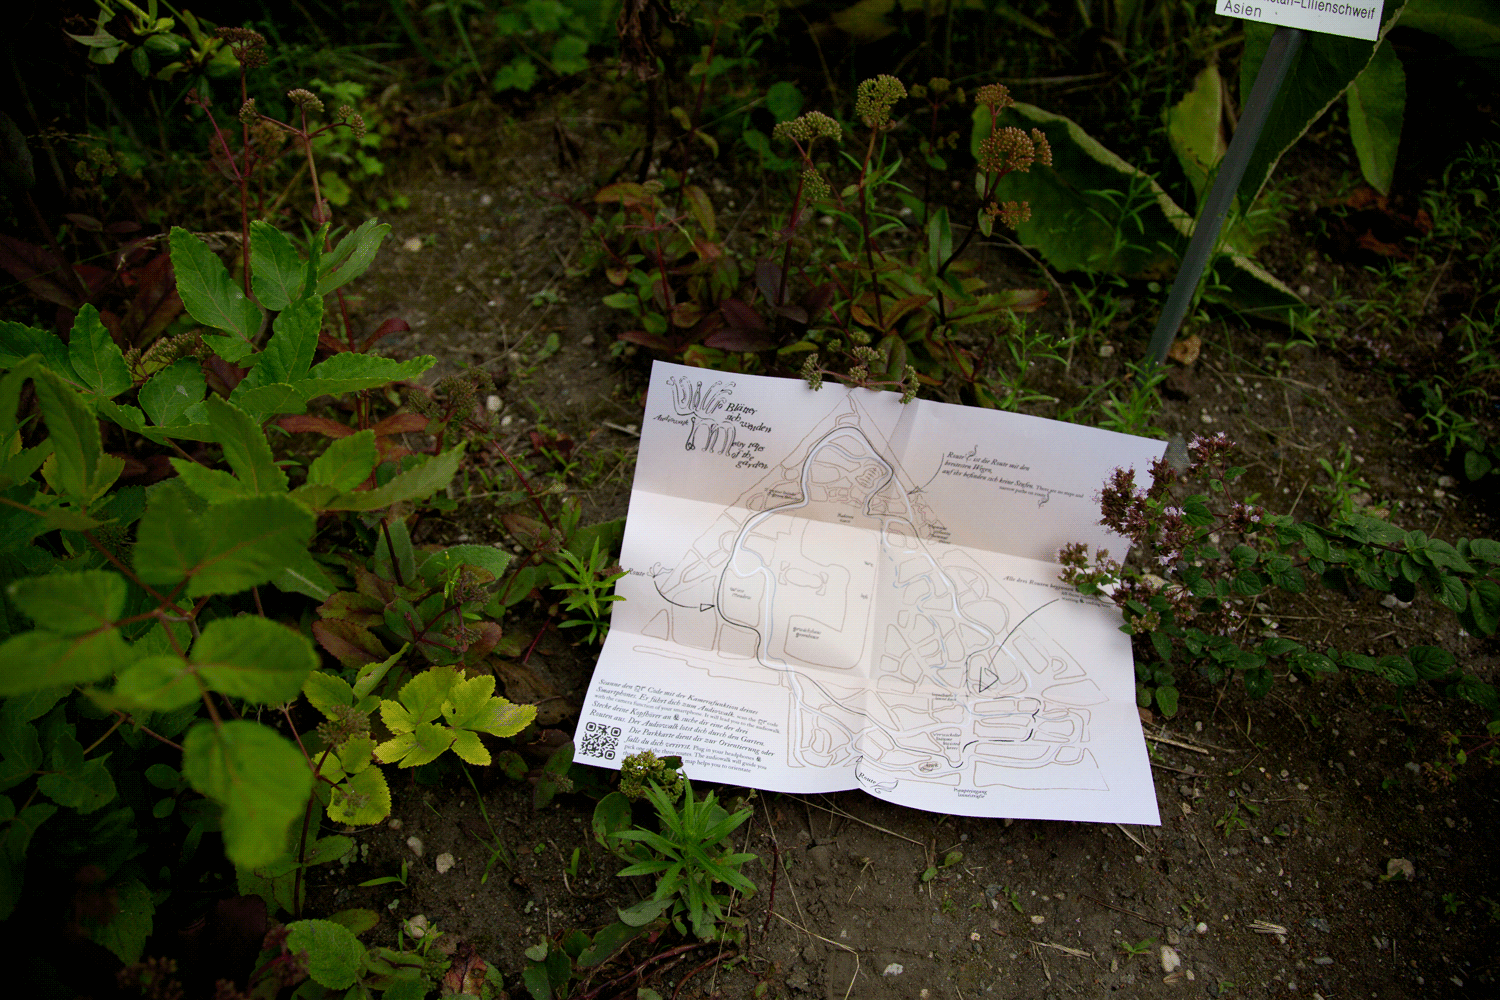 Alternative Map of the botanical garden laying in between plants on the floor